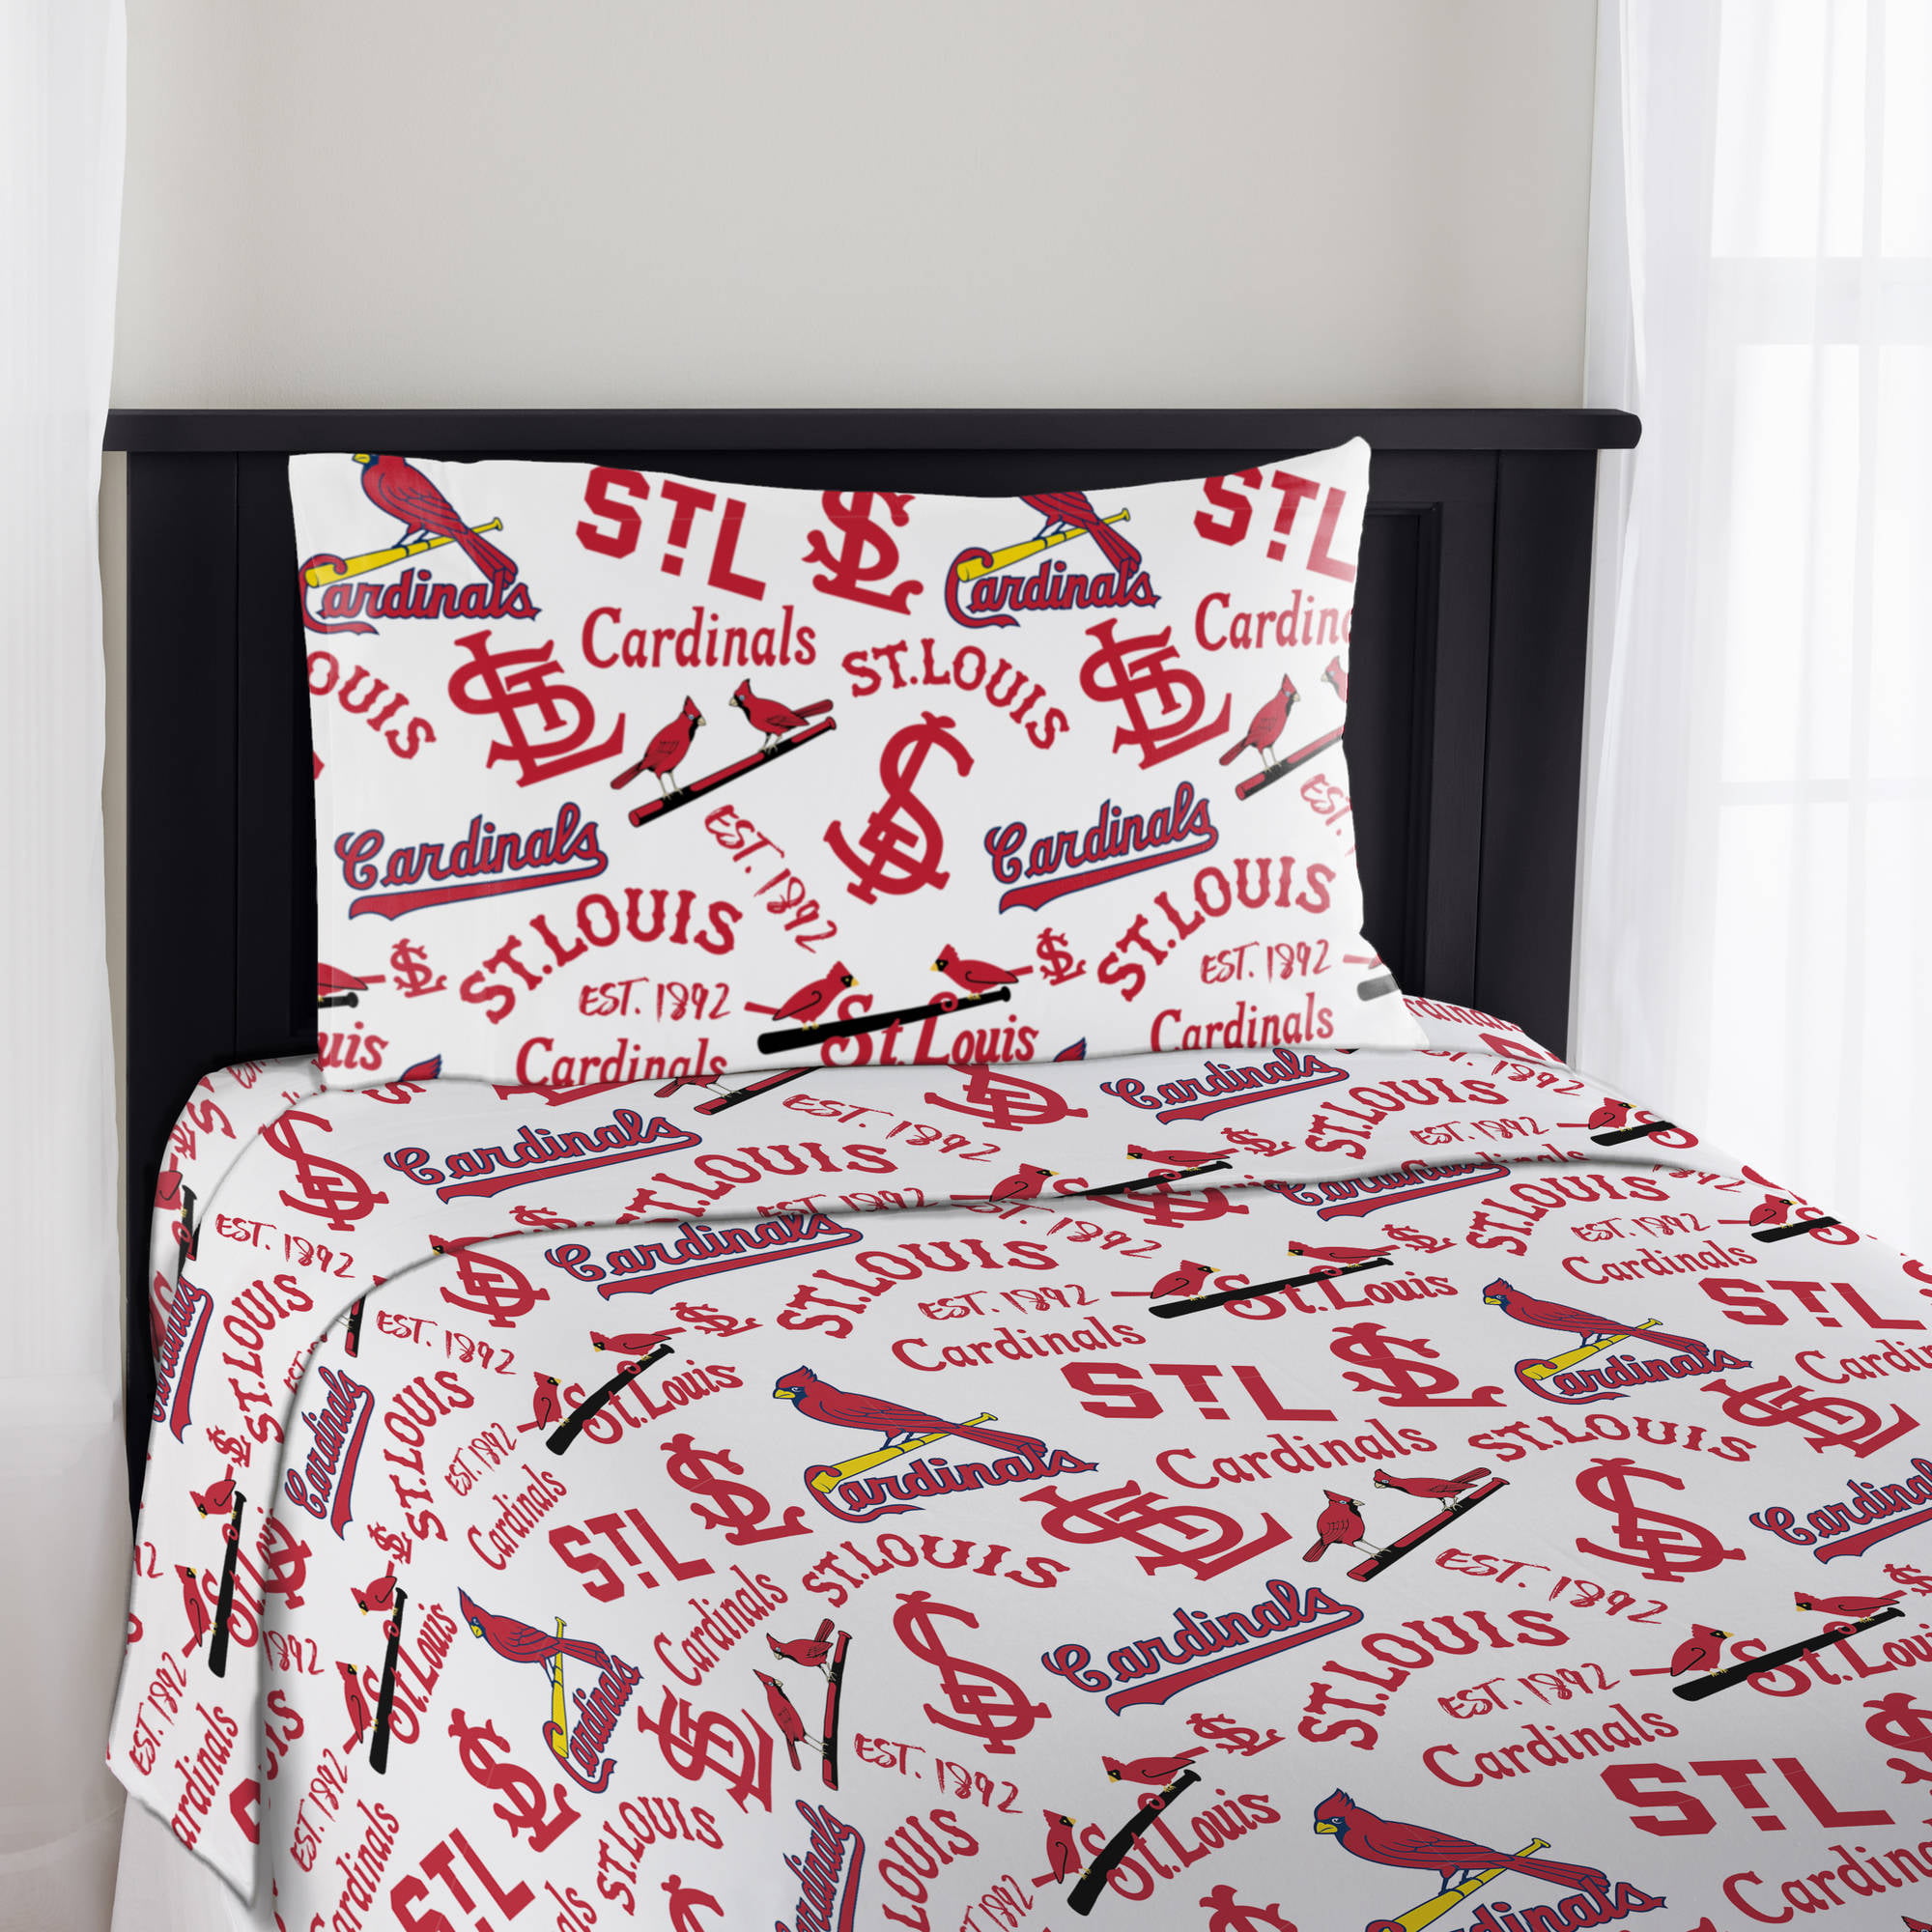 St. Louis Cardinals Tapestry Throw by Northwest